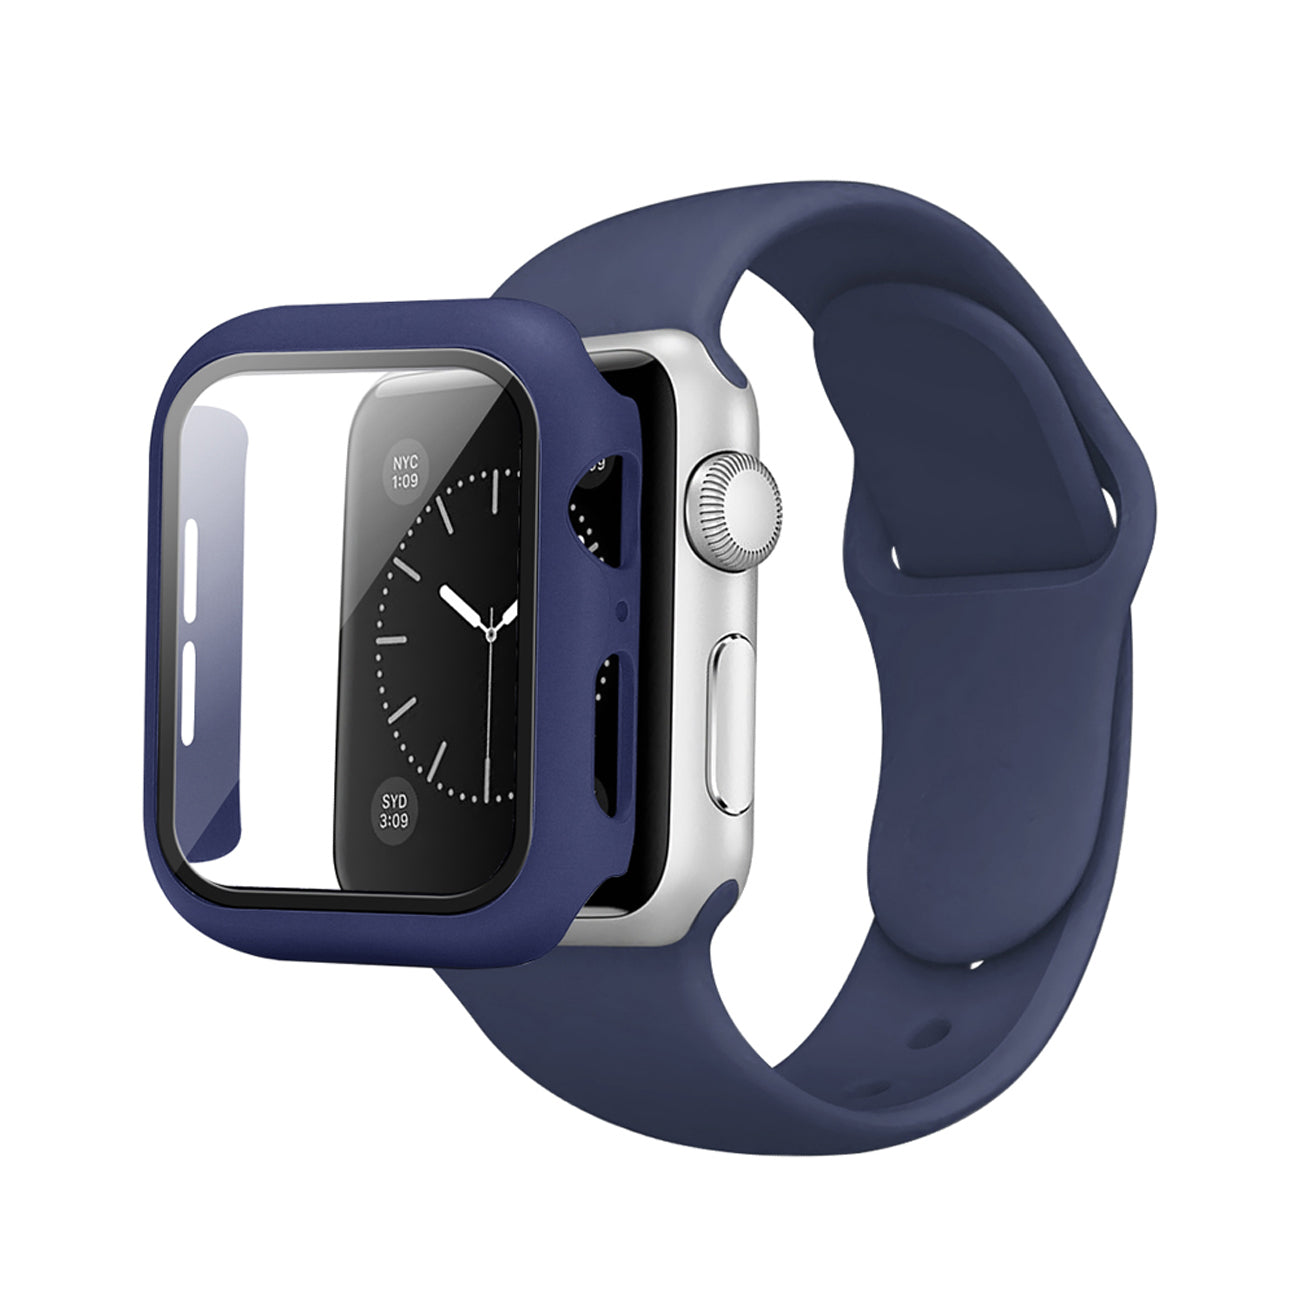 Watch Case PC With Glass Screen Protector, Silicone Watch Band Apple Watch 40mm Navy Color